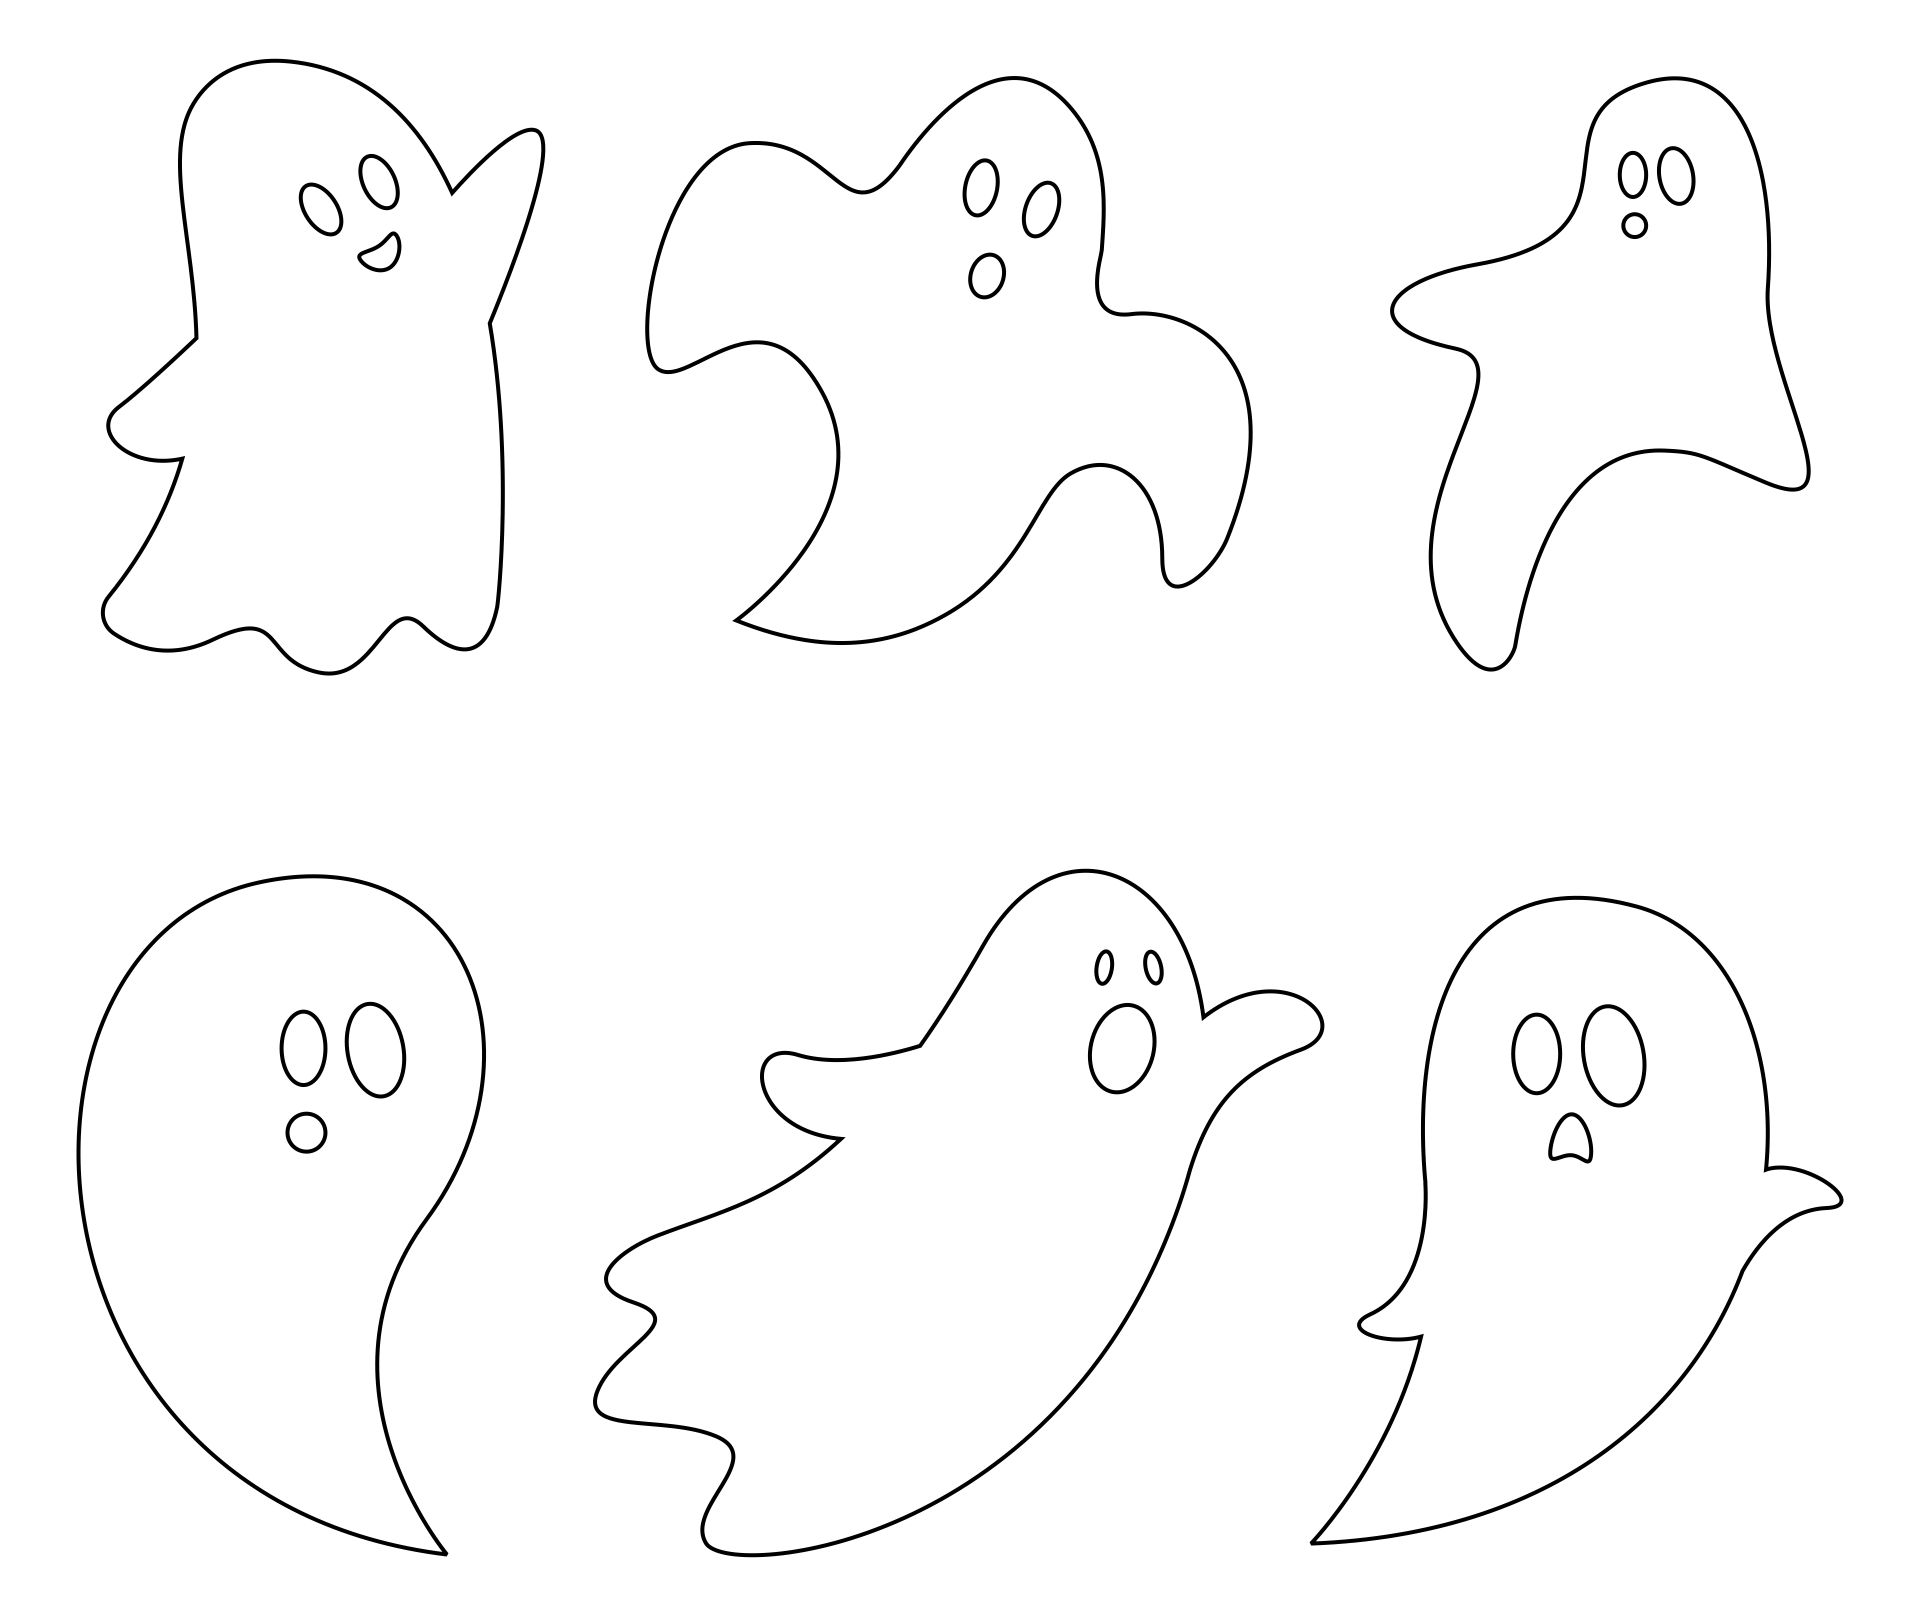 Printable Halloween Ghost Templates To Cut Out